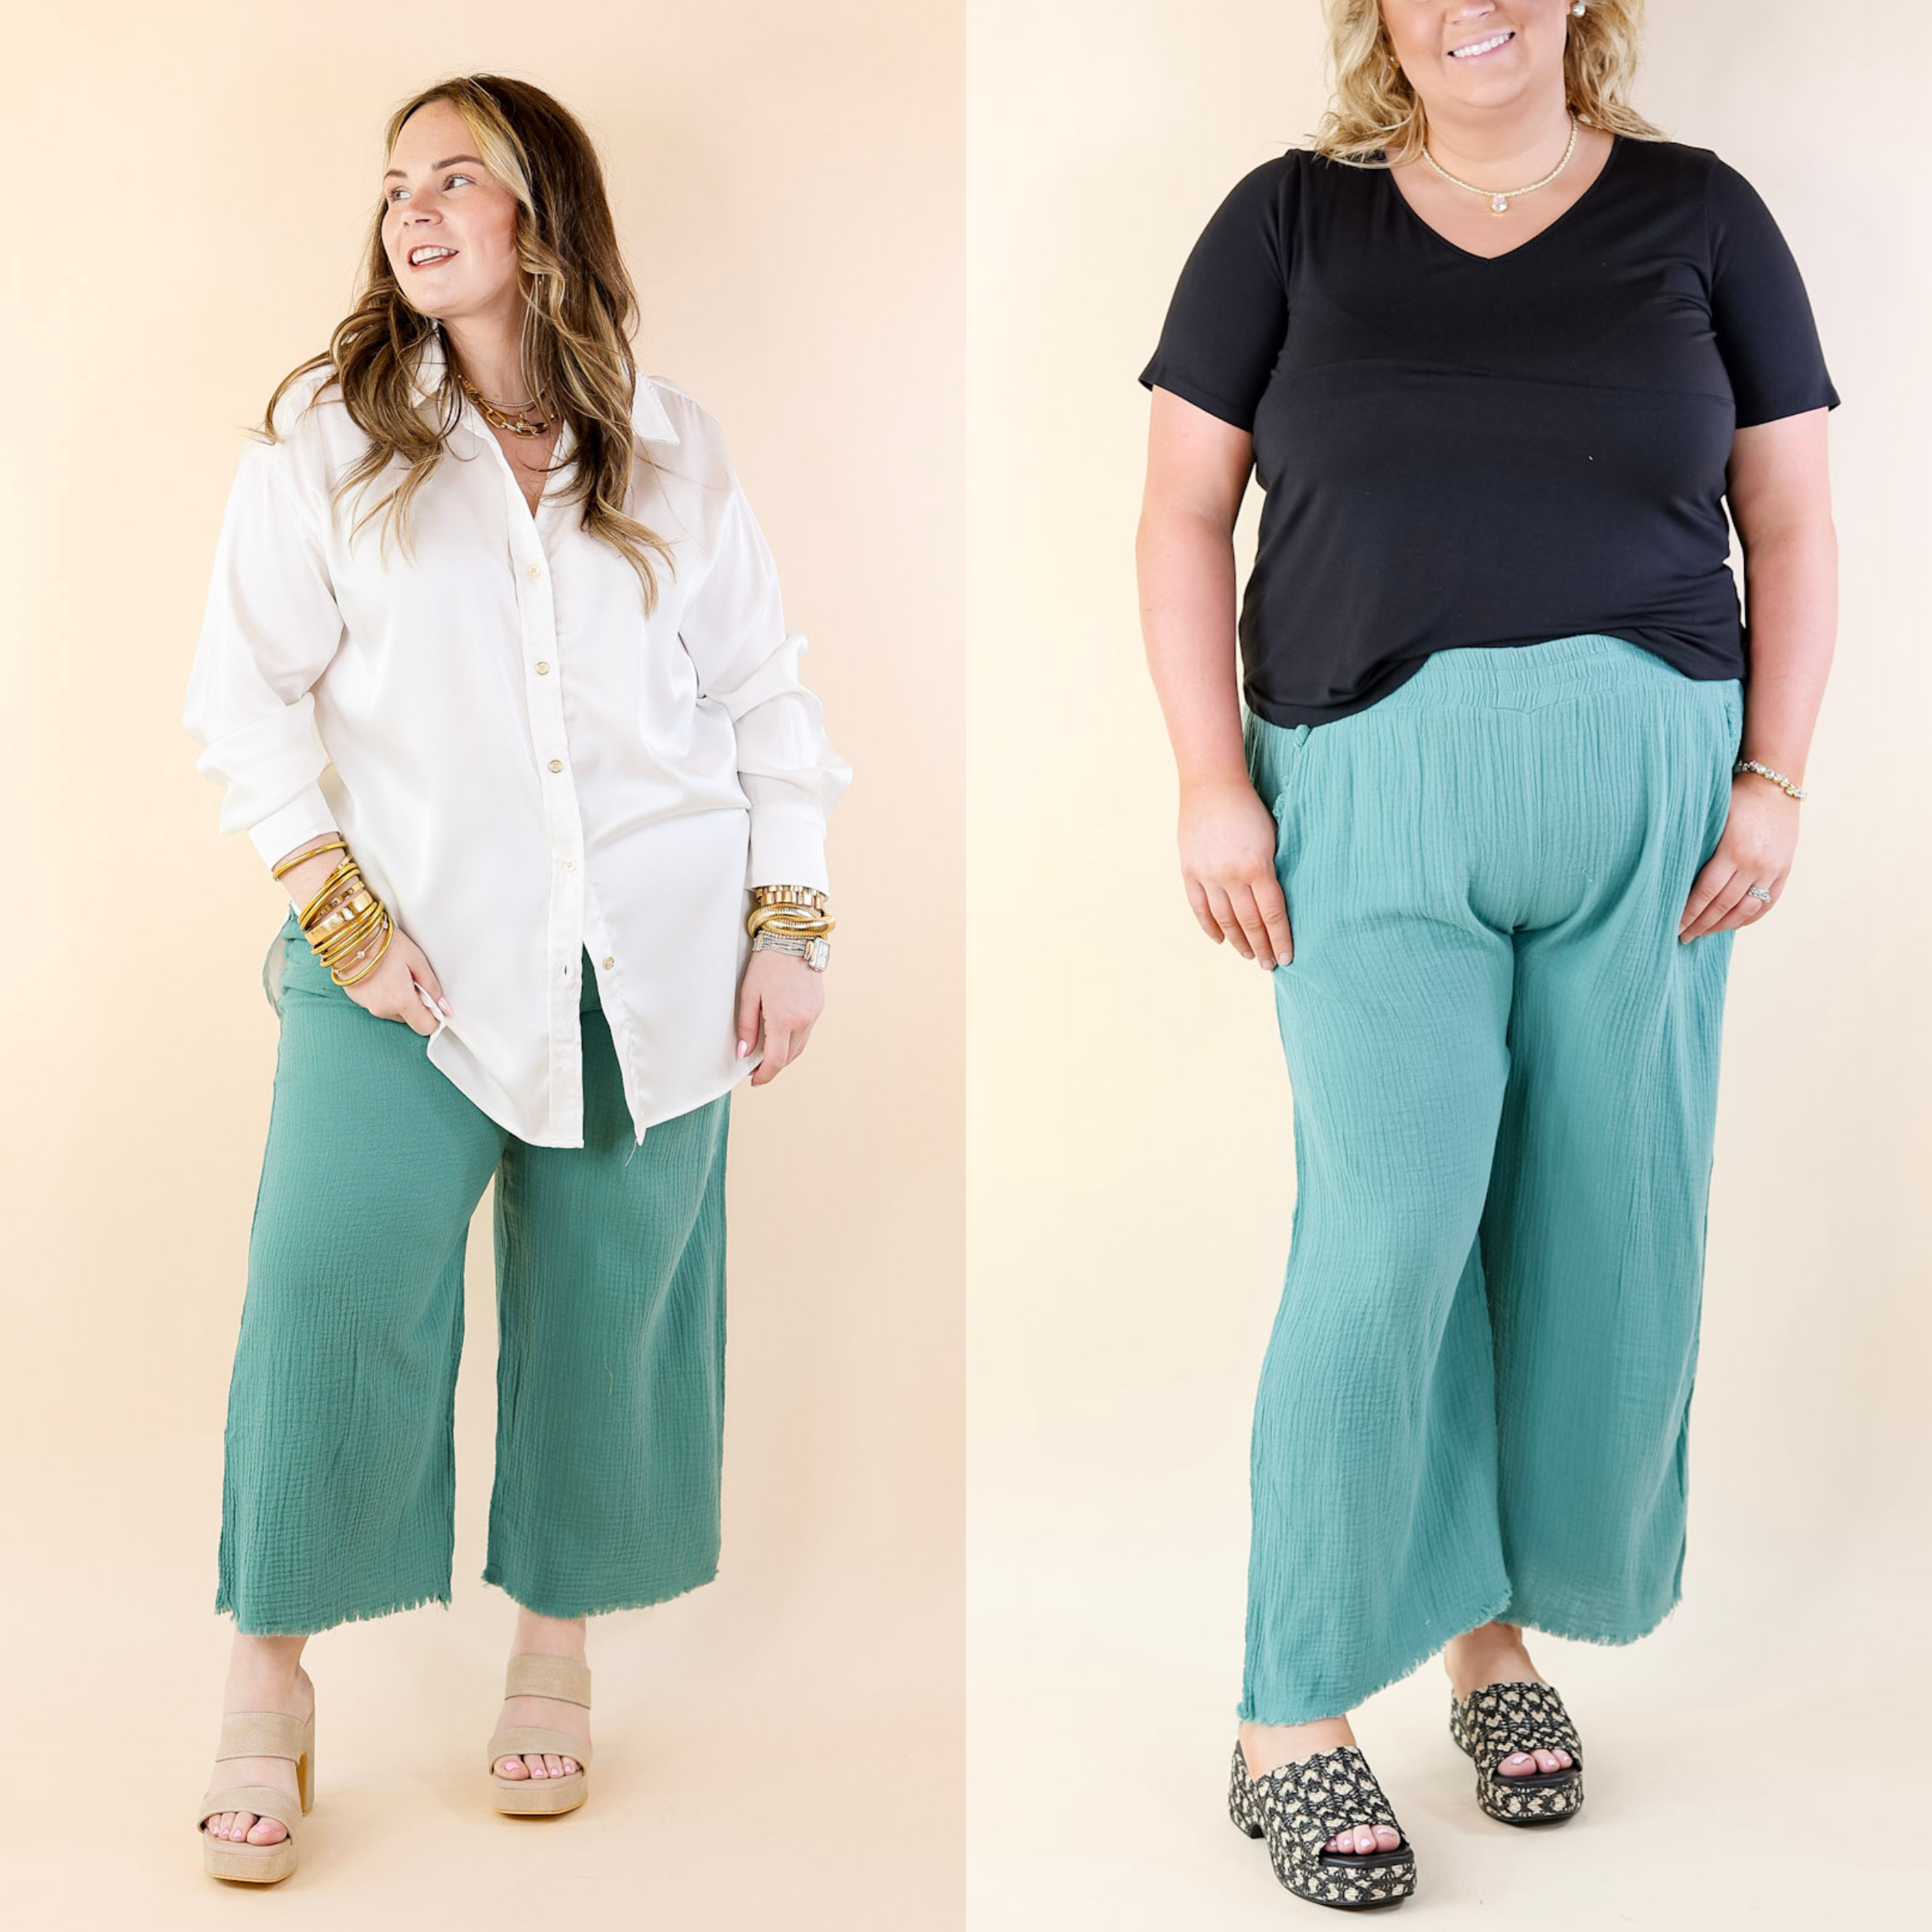 Right On Cue Elastic Waistband Cropped Pants with Frayed Hem in Dusty Green - Giddy Up Glamour Boutique